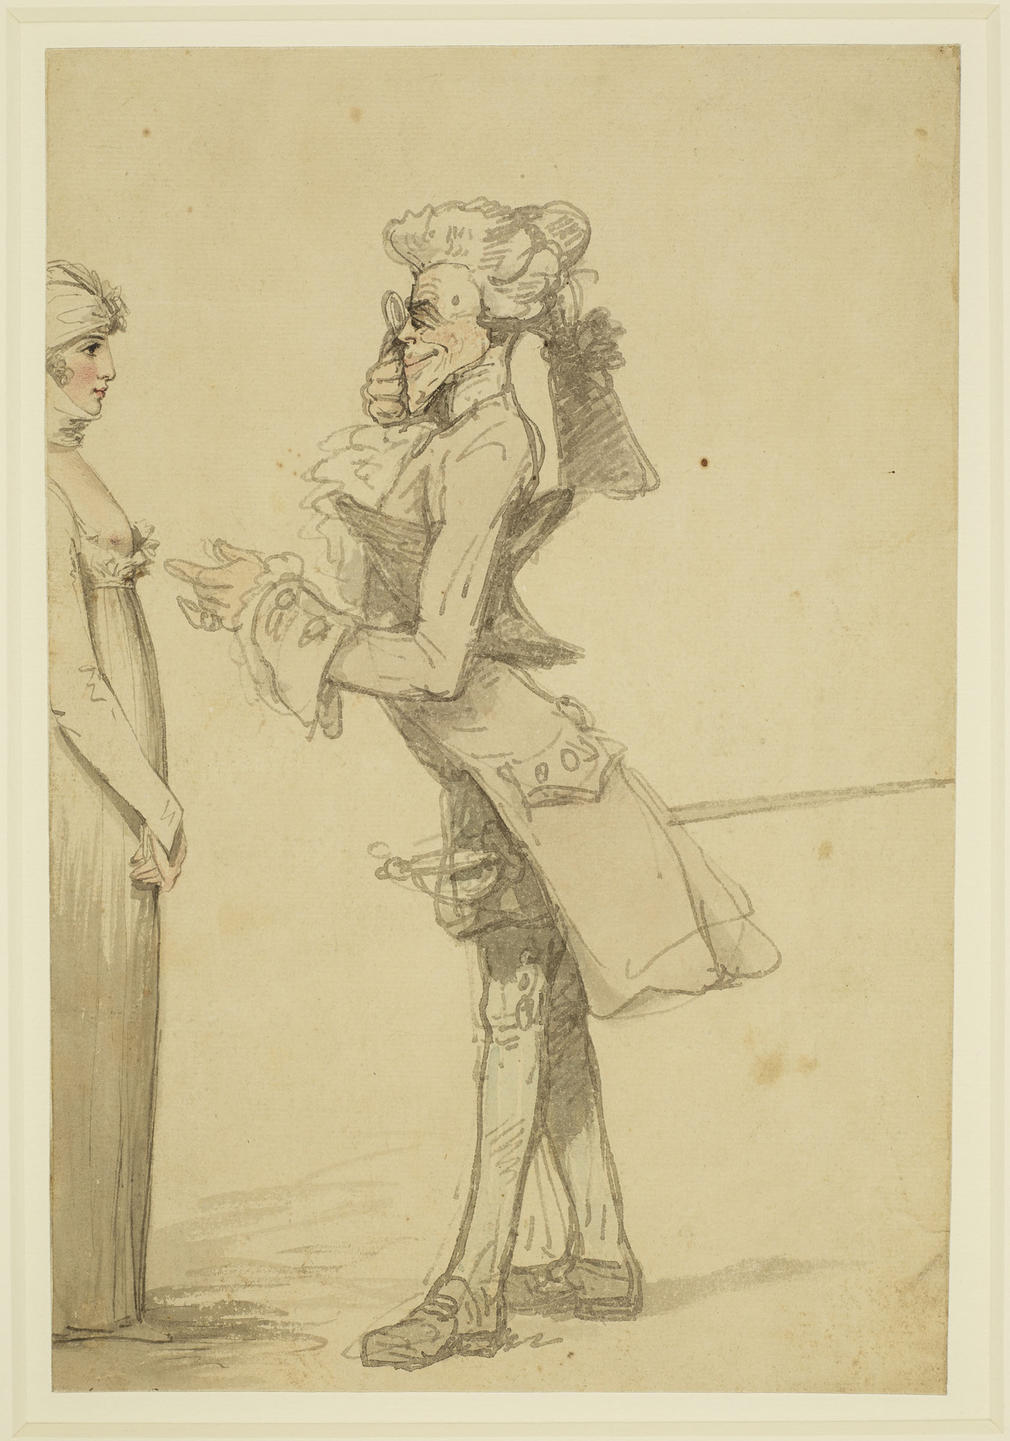 A pen and watercolour of a lascivious connoisseur avidly examining a female beauty with the aid of his eye glass. The man wears a wig and frock coat and carries a sword. The woman stands in right profile and with her hands in front of her, impassively ret